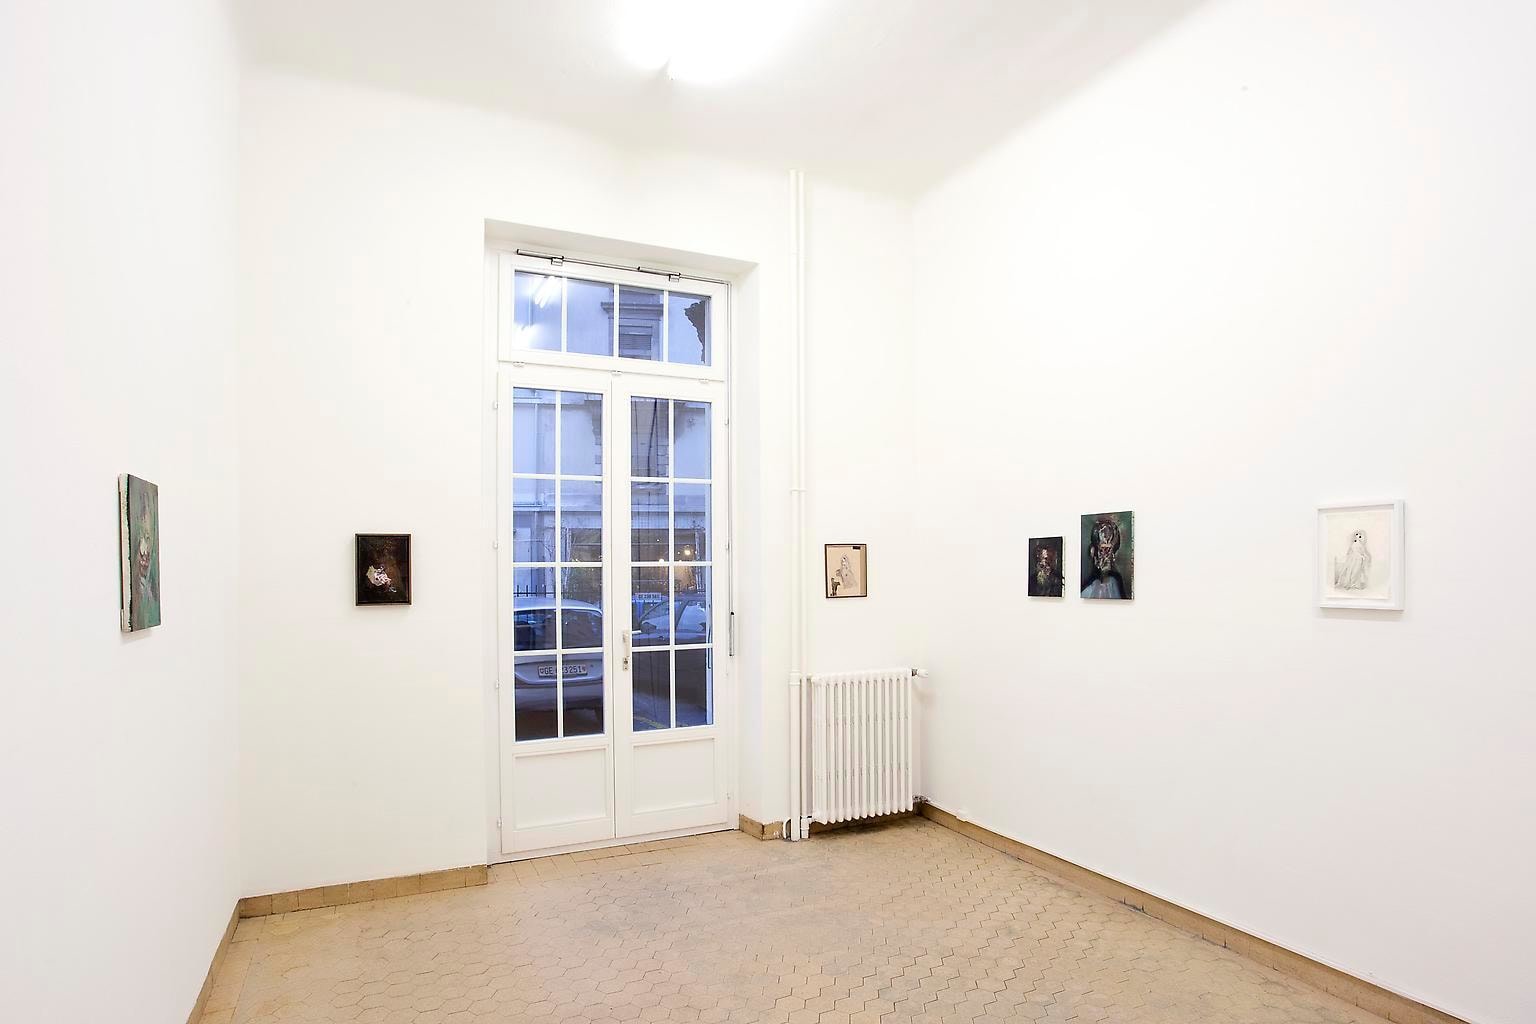  Installation view, Ross Chisholm, The Garden, Marc Jancou, Geneva, January 19 - March 10, 2012